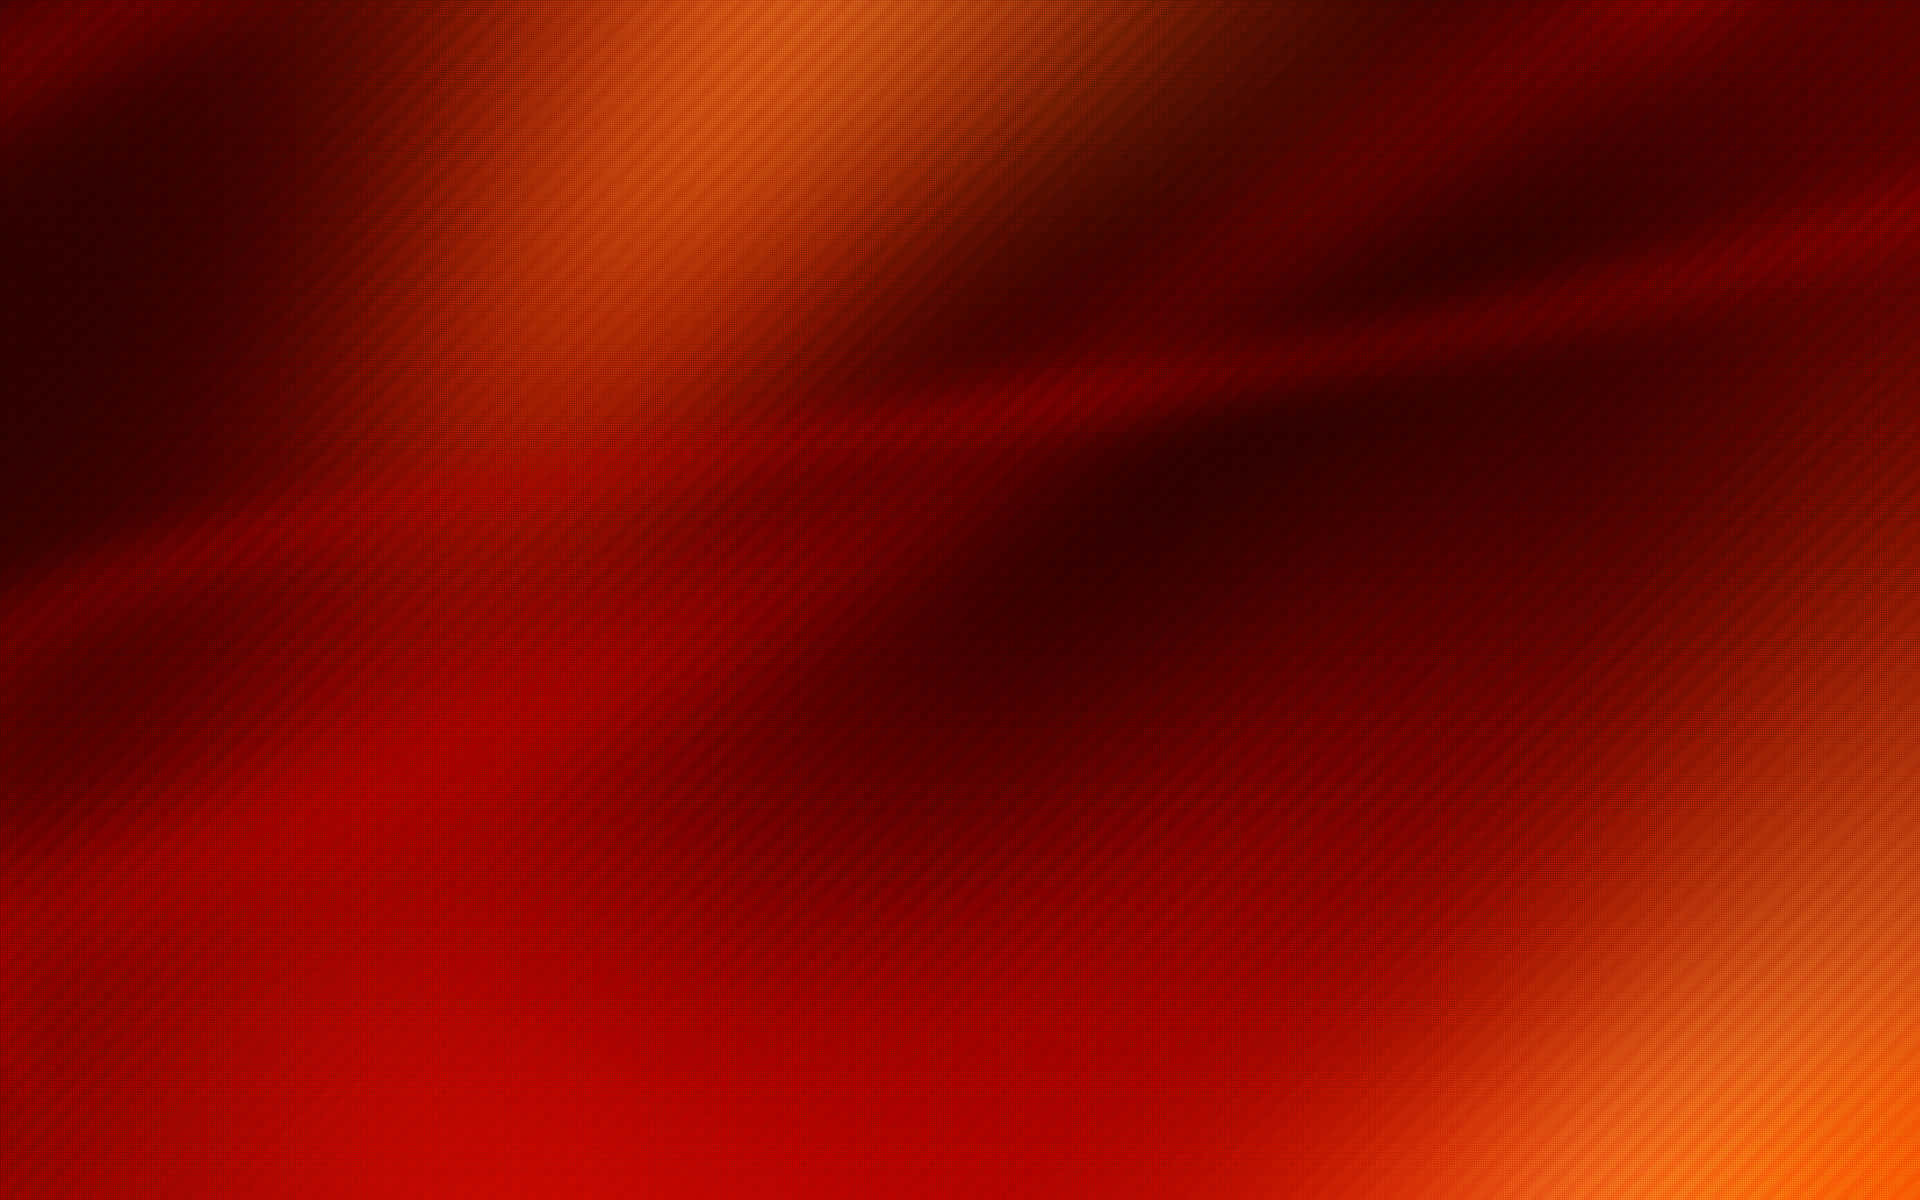 Livligröd Bakgrund (for Example, If Talking About A Vibrant Red Wallpaper For A Computer Or Mobile Device)